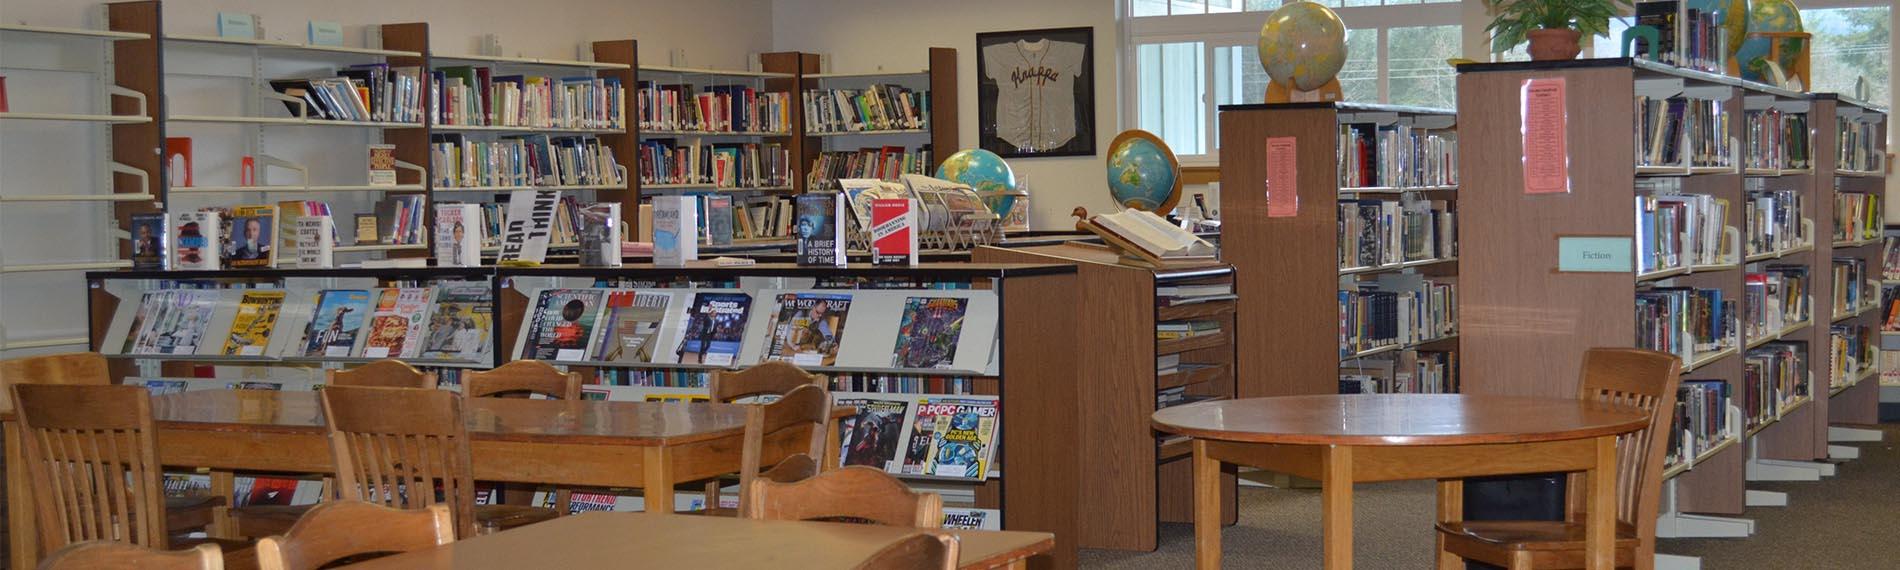 Library tables and shelves